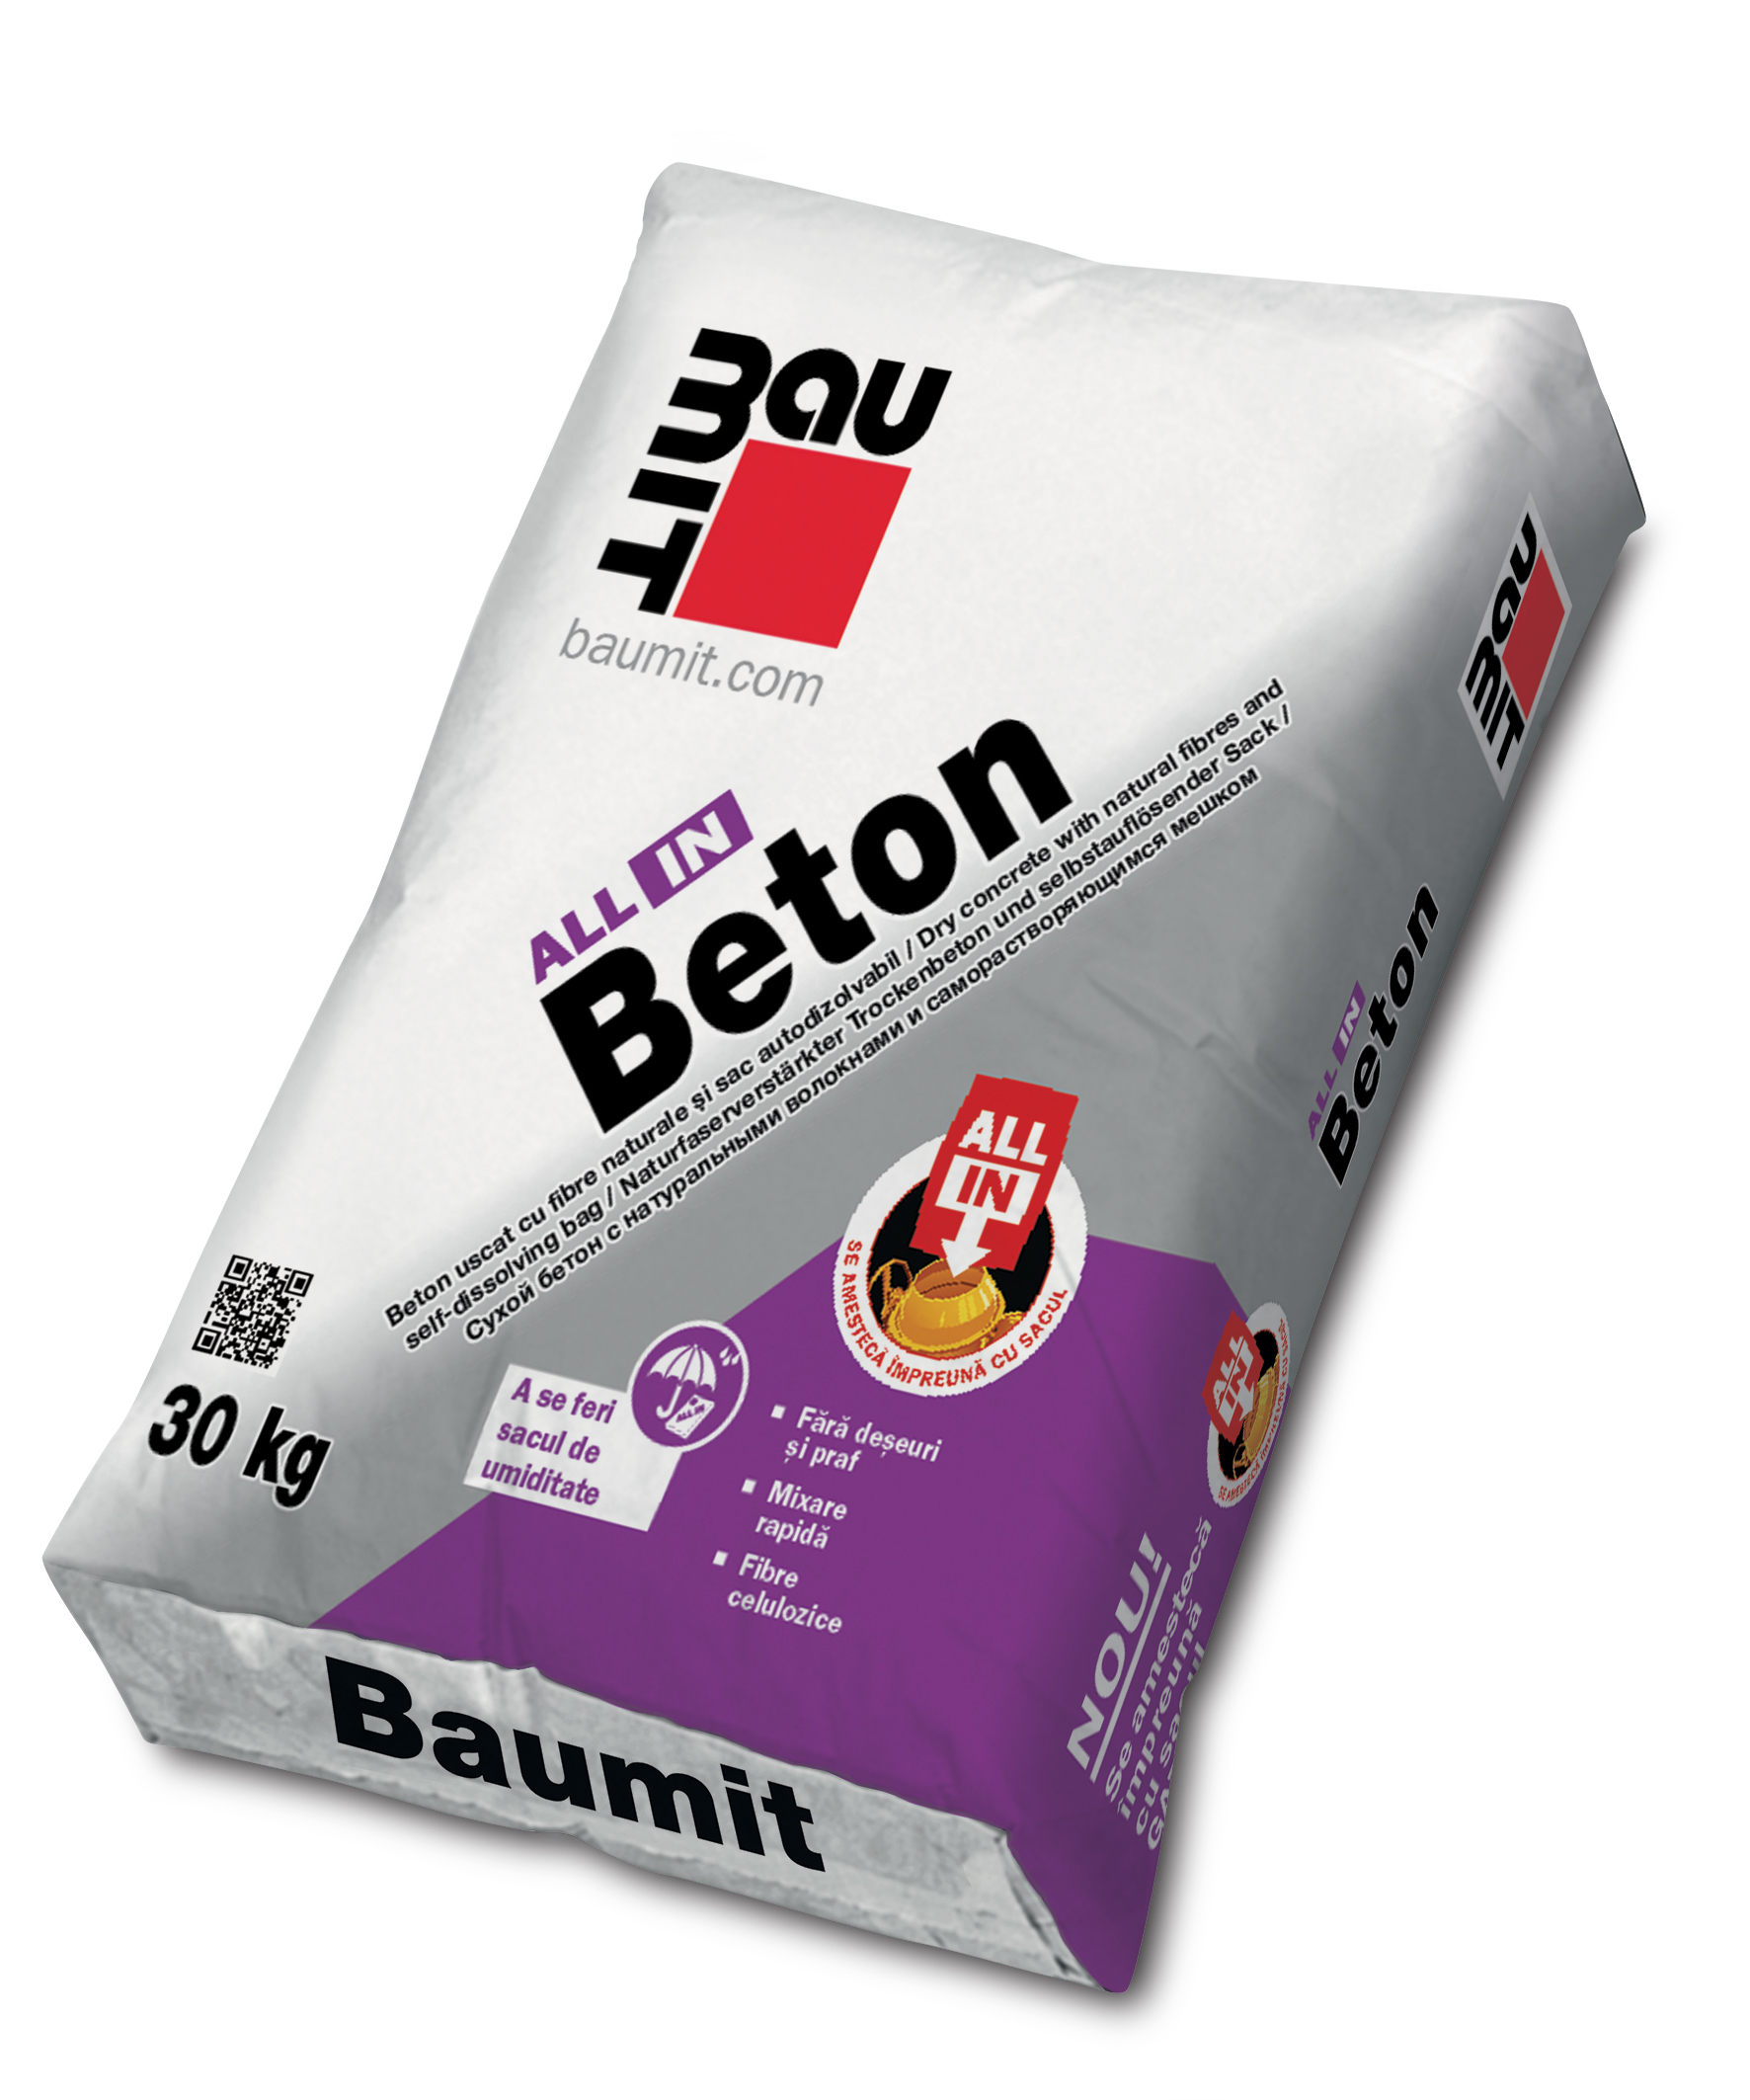 Special Cement Grout - ALL IN BETON Baumit 30 kg, https:maxbau.ro